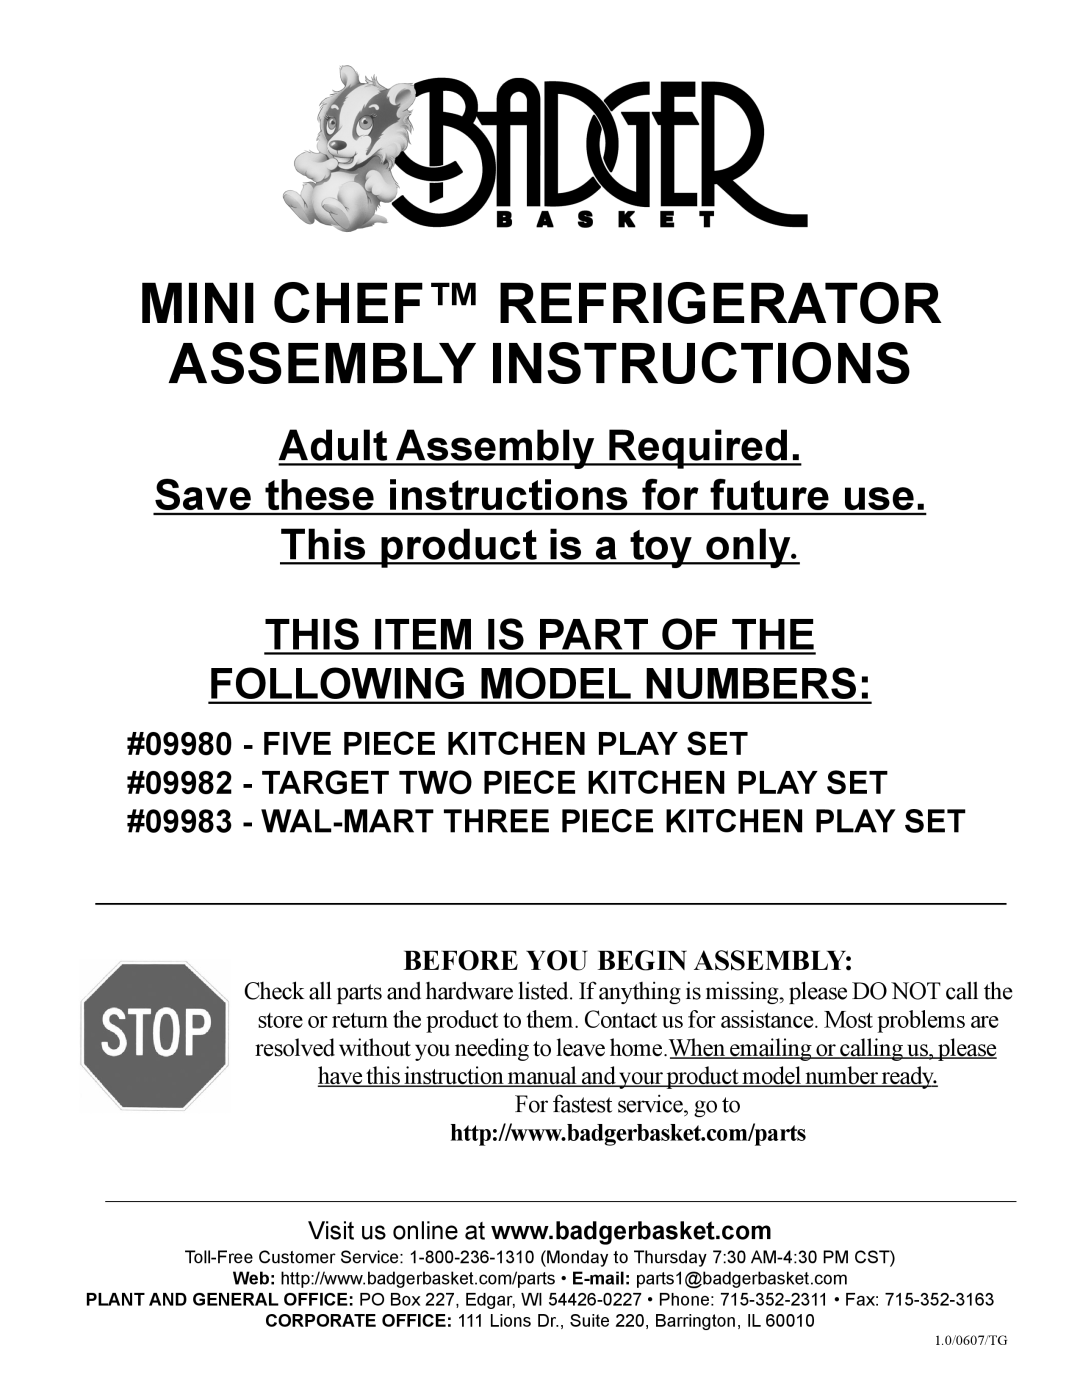 Badger Basket 9983, 9982, 9980 instruction manual Mini Chef Refrigerator Assembly Instructions, Adult Assembly Required 